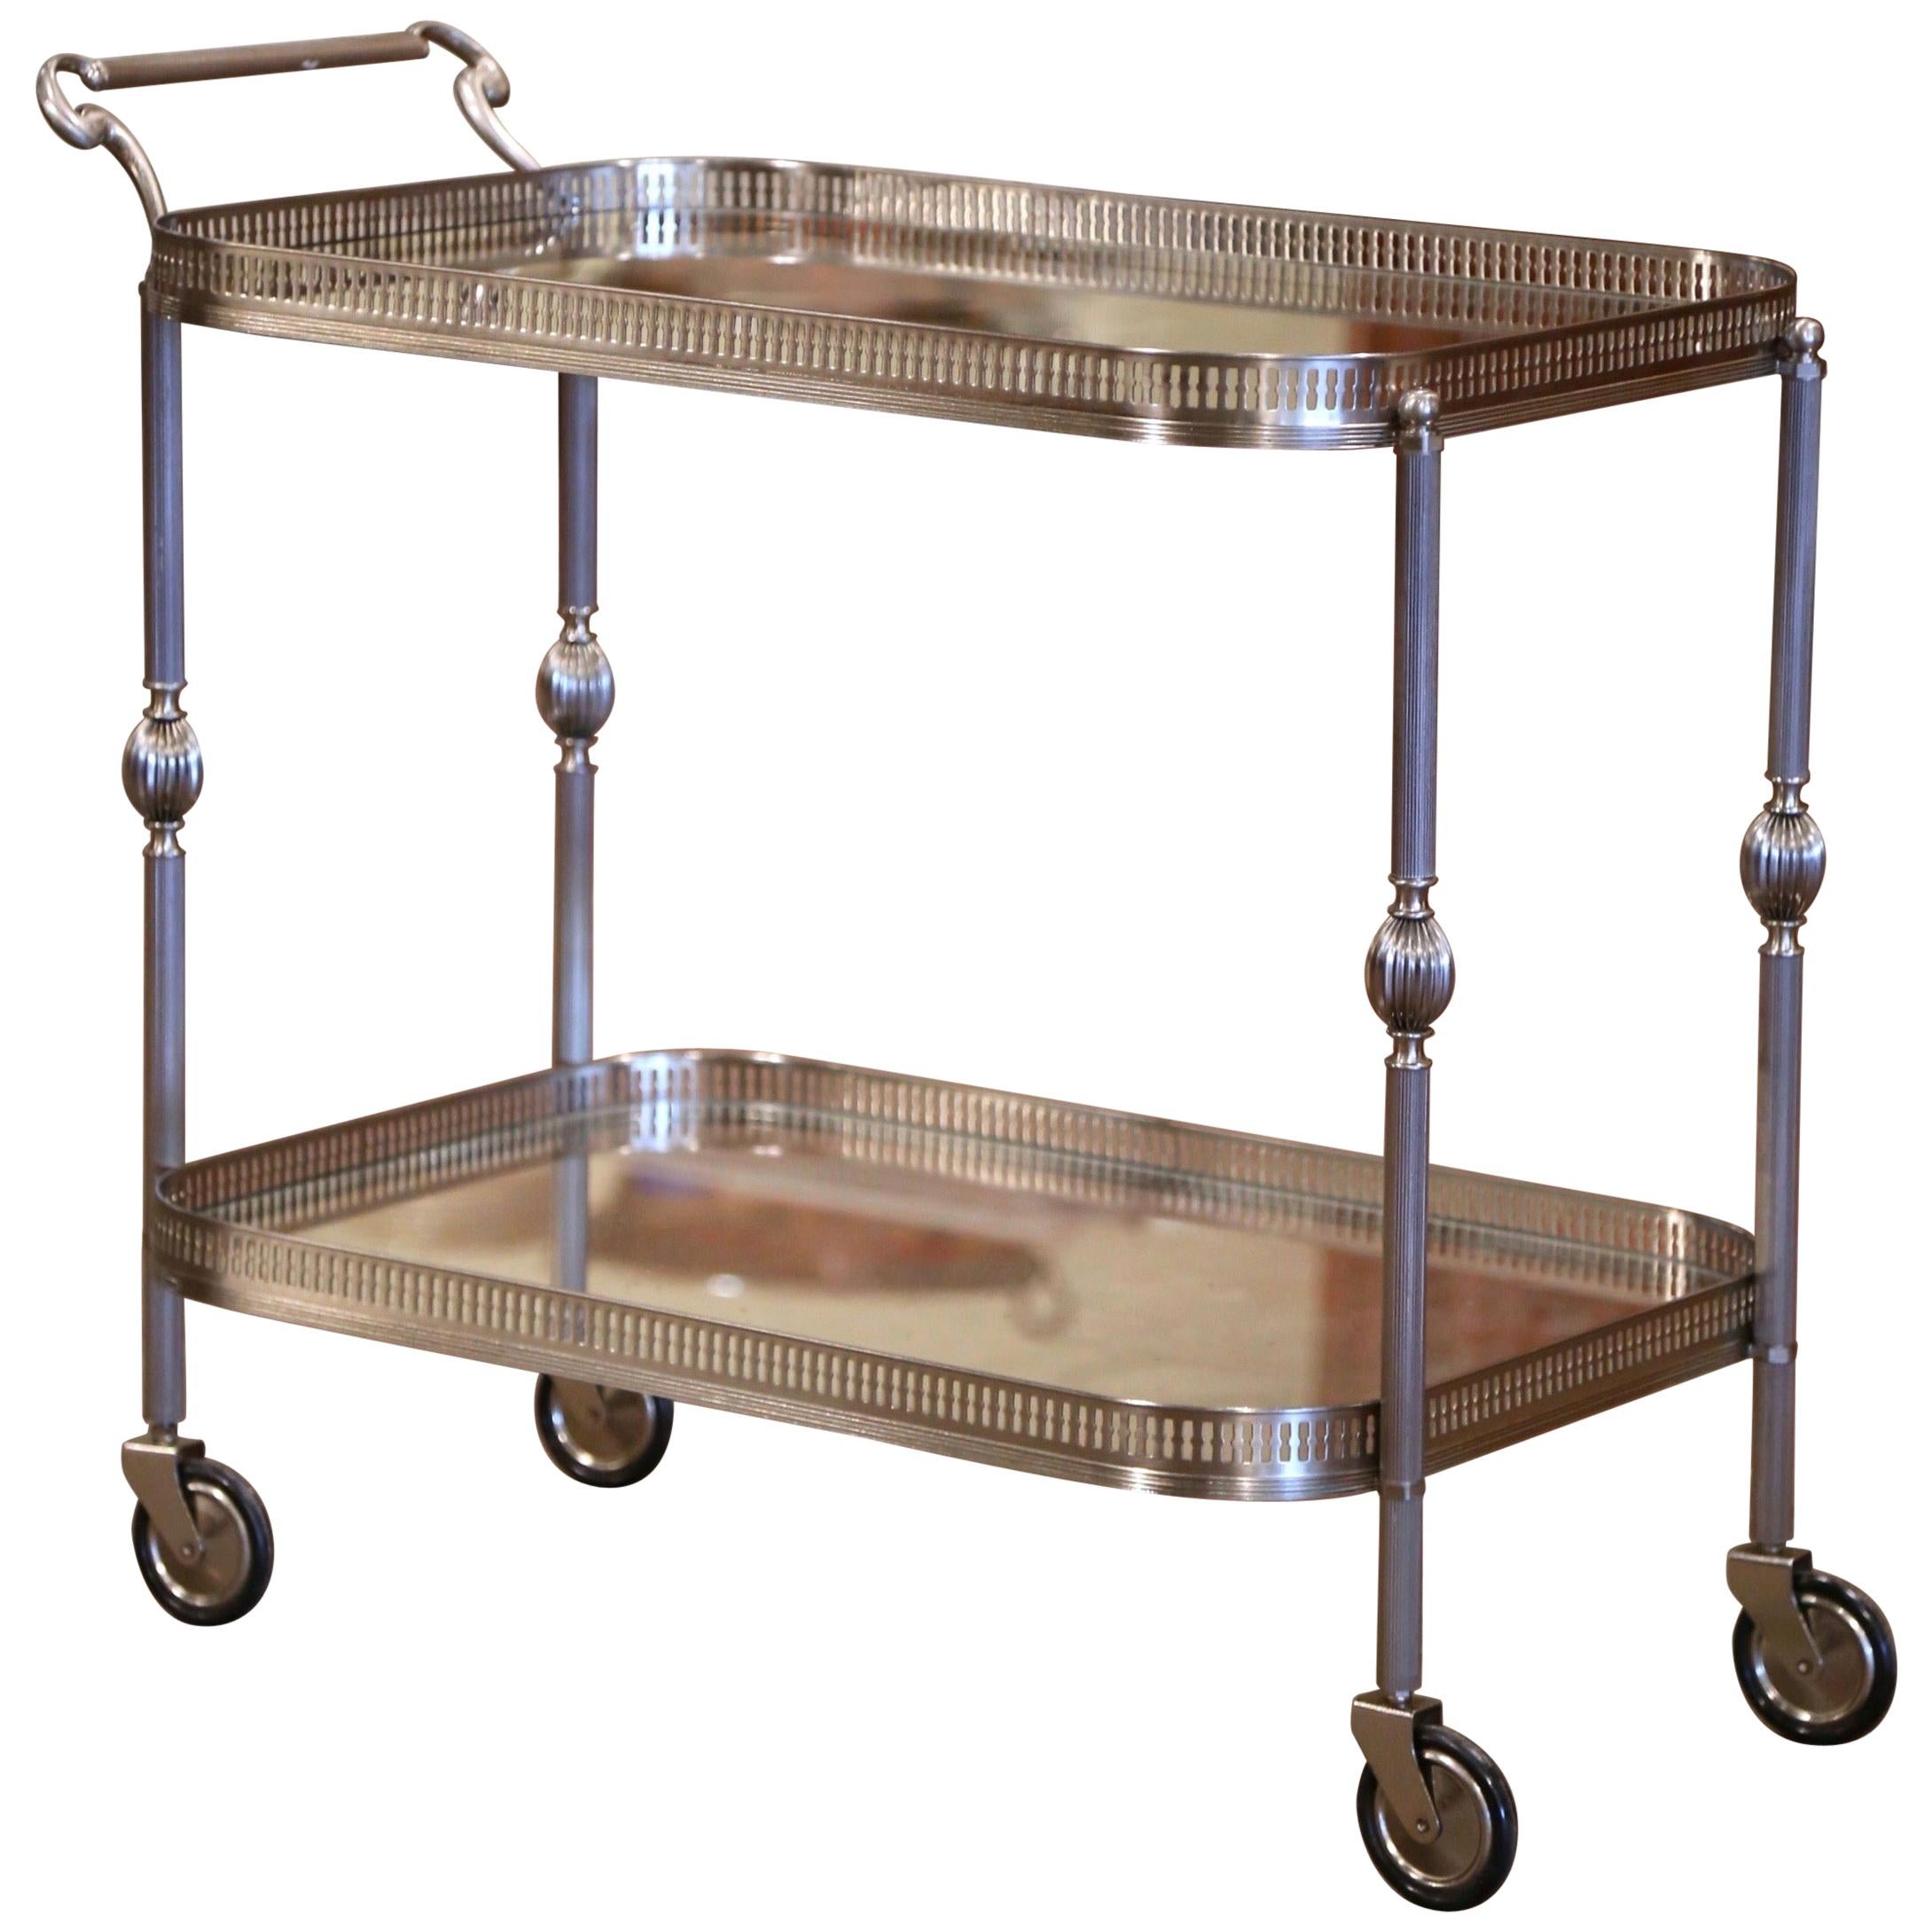 Mid-20th Century French Silvered and Glass Desert Table or Bar Cart on Wheels